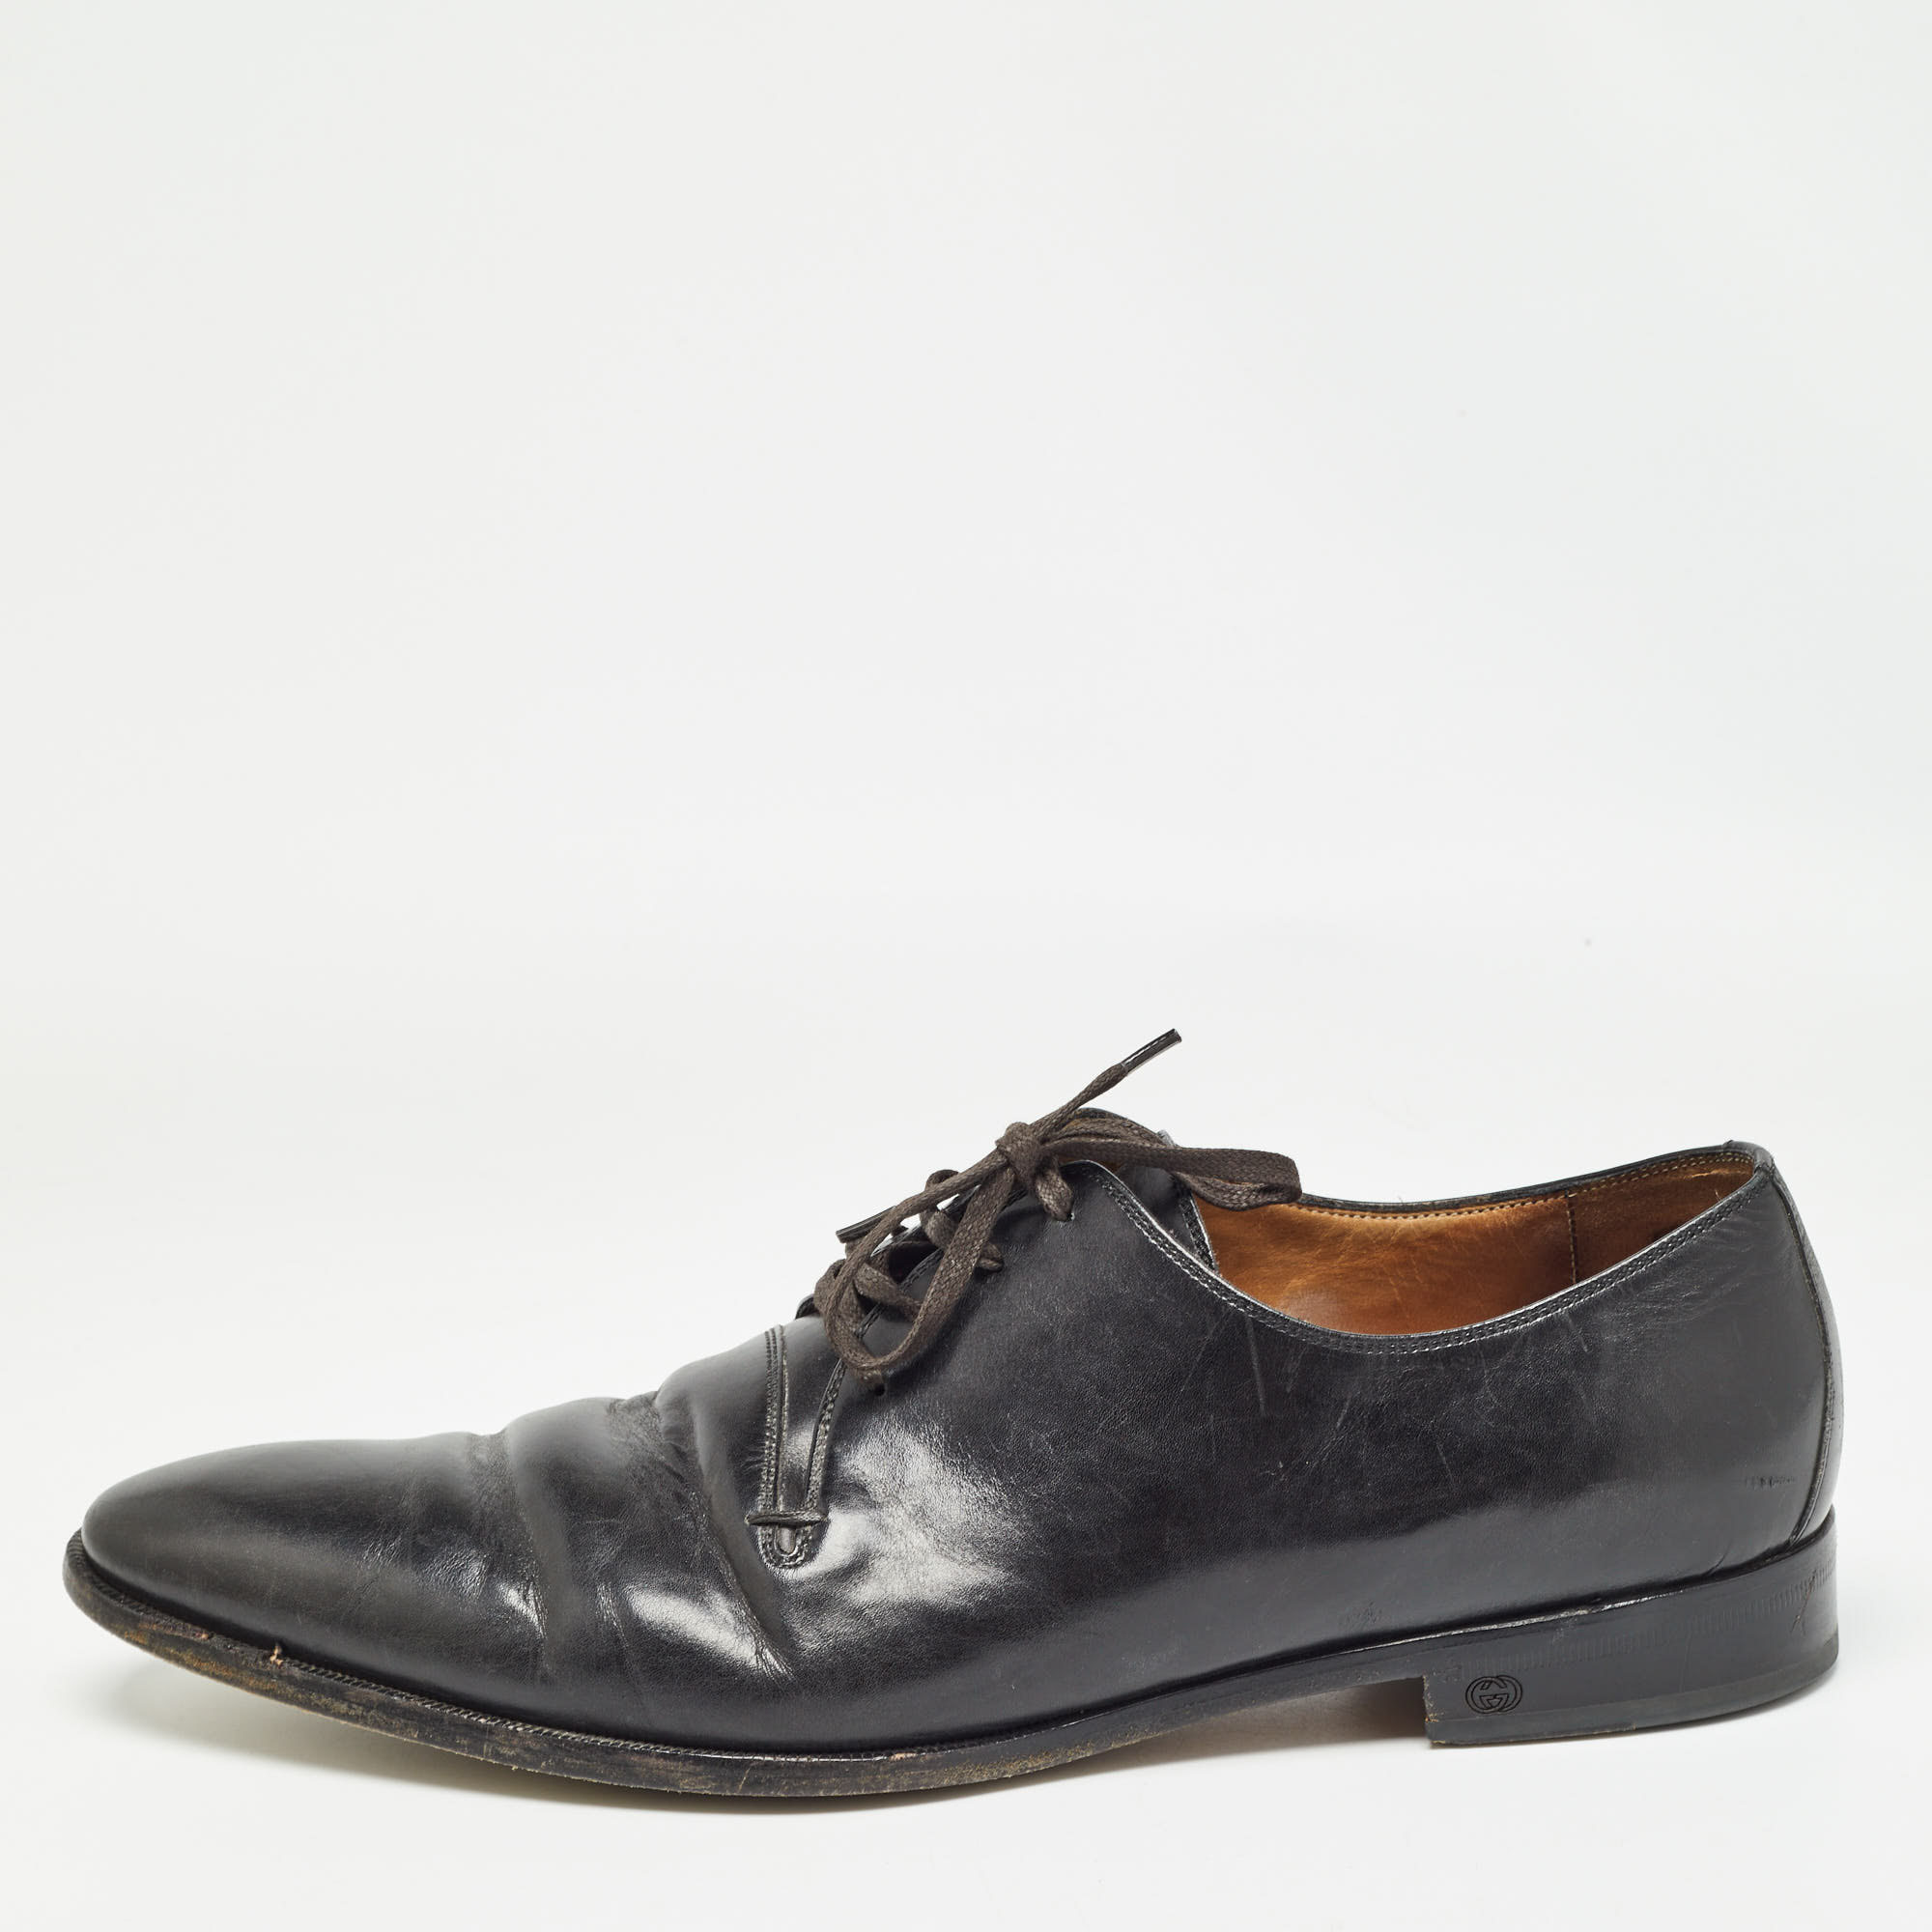 Gucci black leather lace up derby size 45